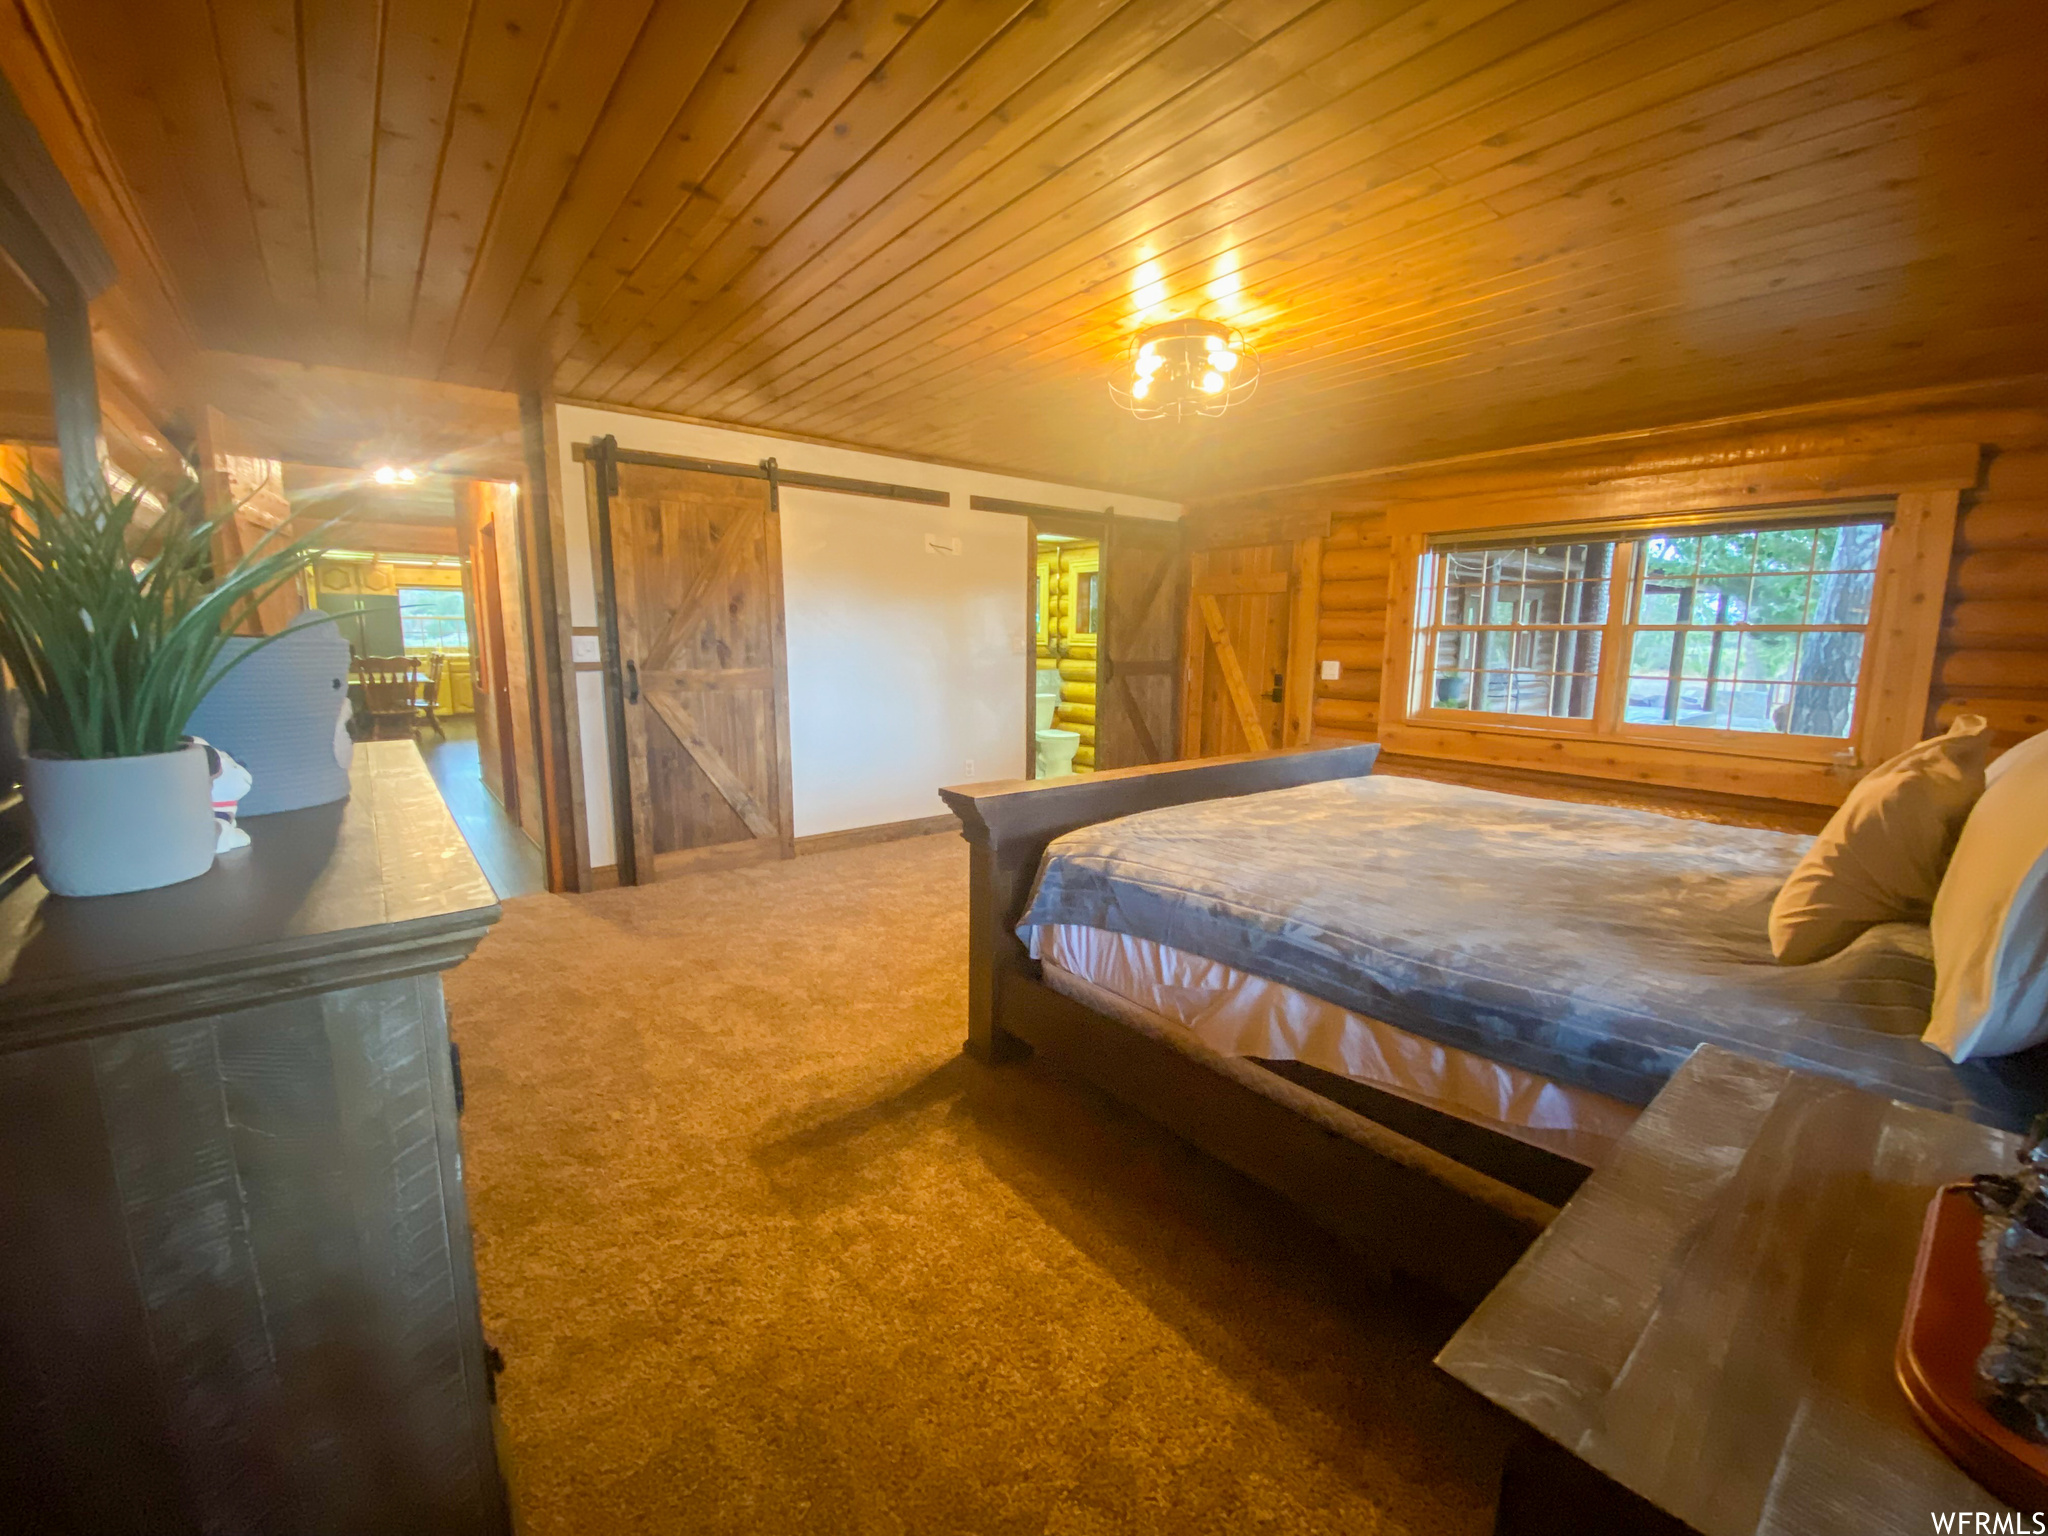 Carpeted bedroom featuring a barn door and wood ceiling